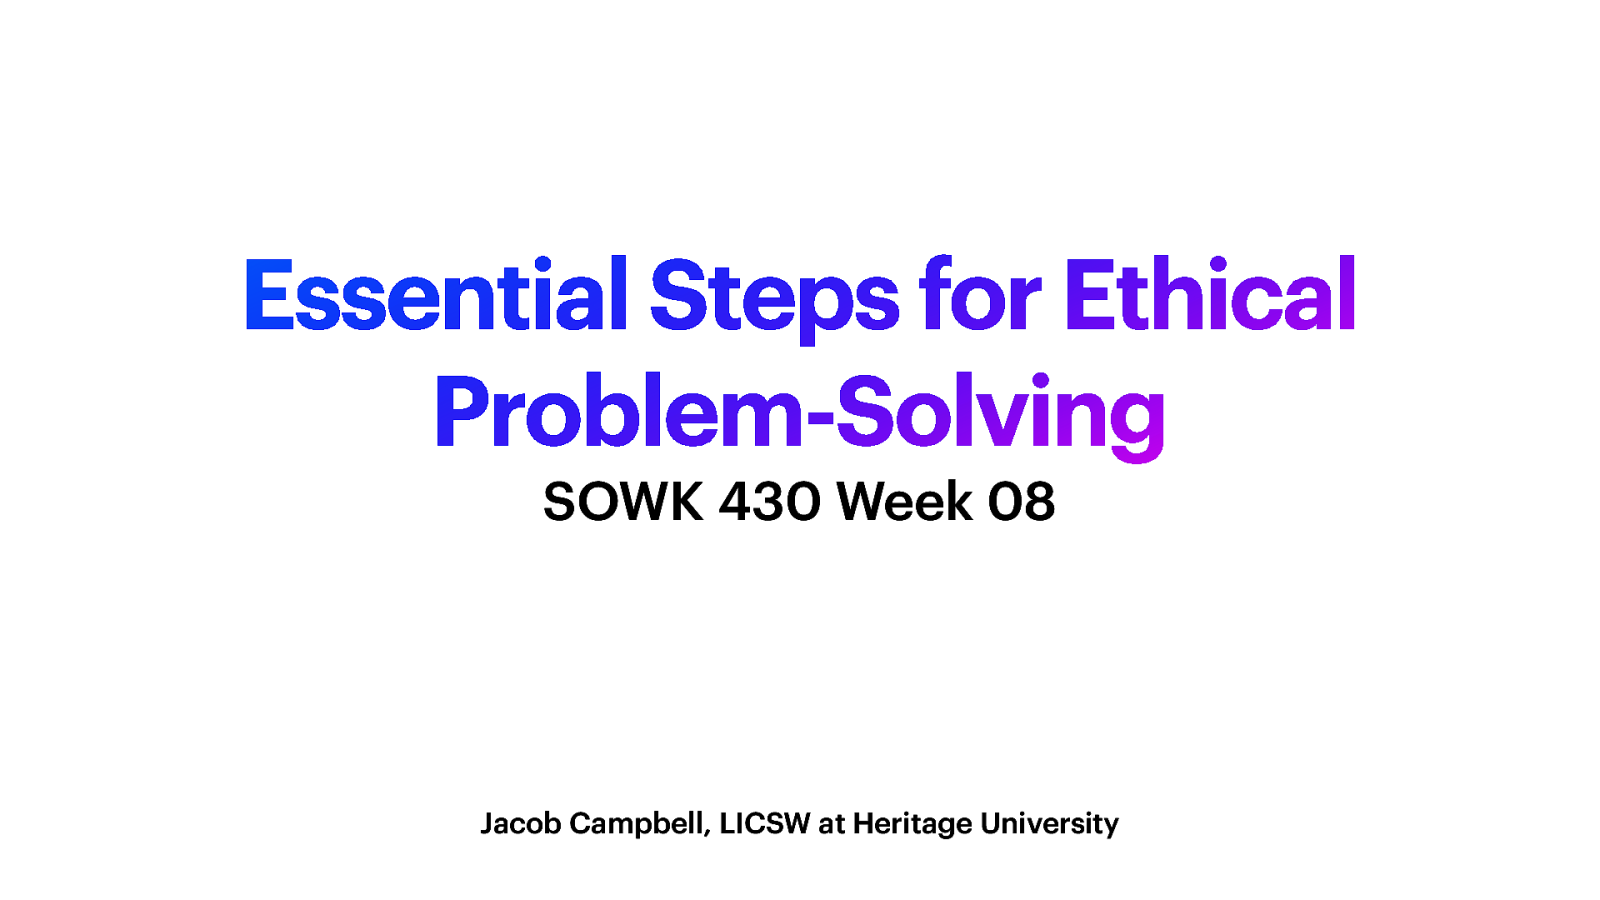 Fall 2022 SOWK 430 Week 10 - Model for Ethical Decision Making